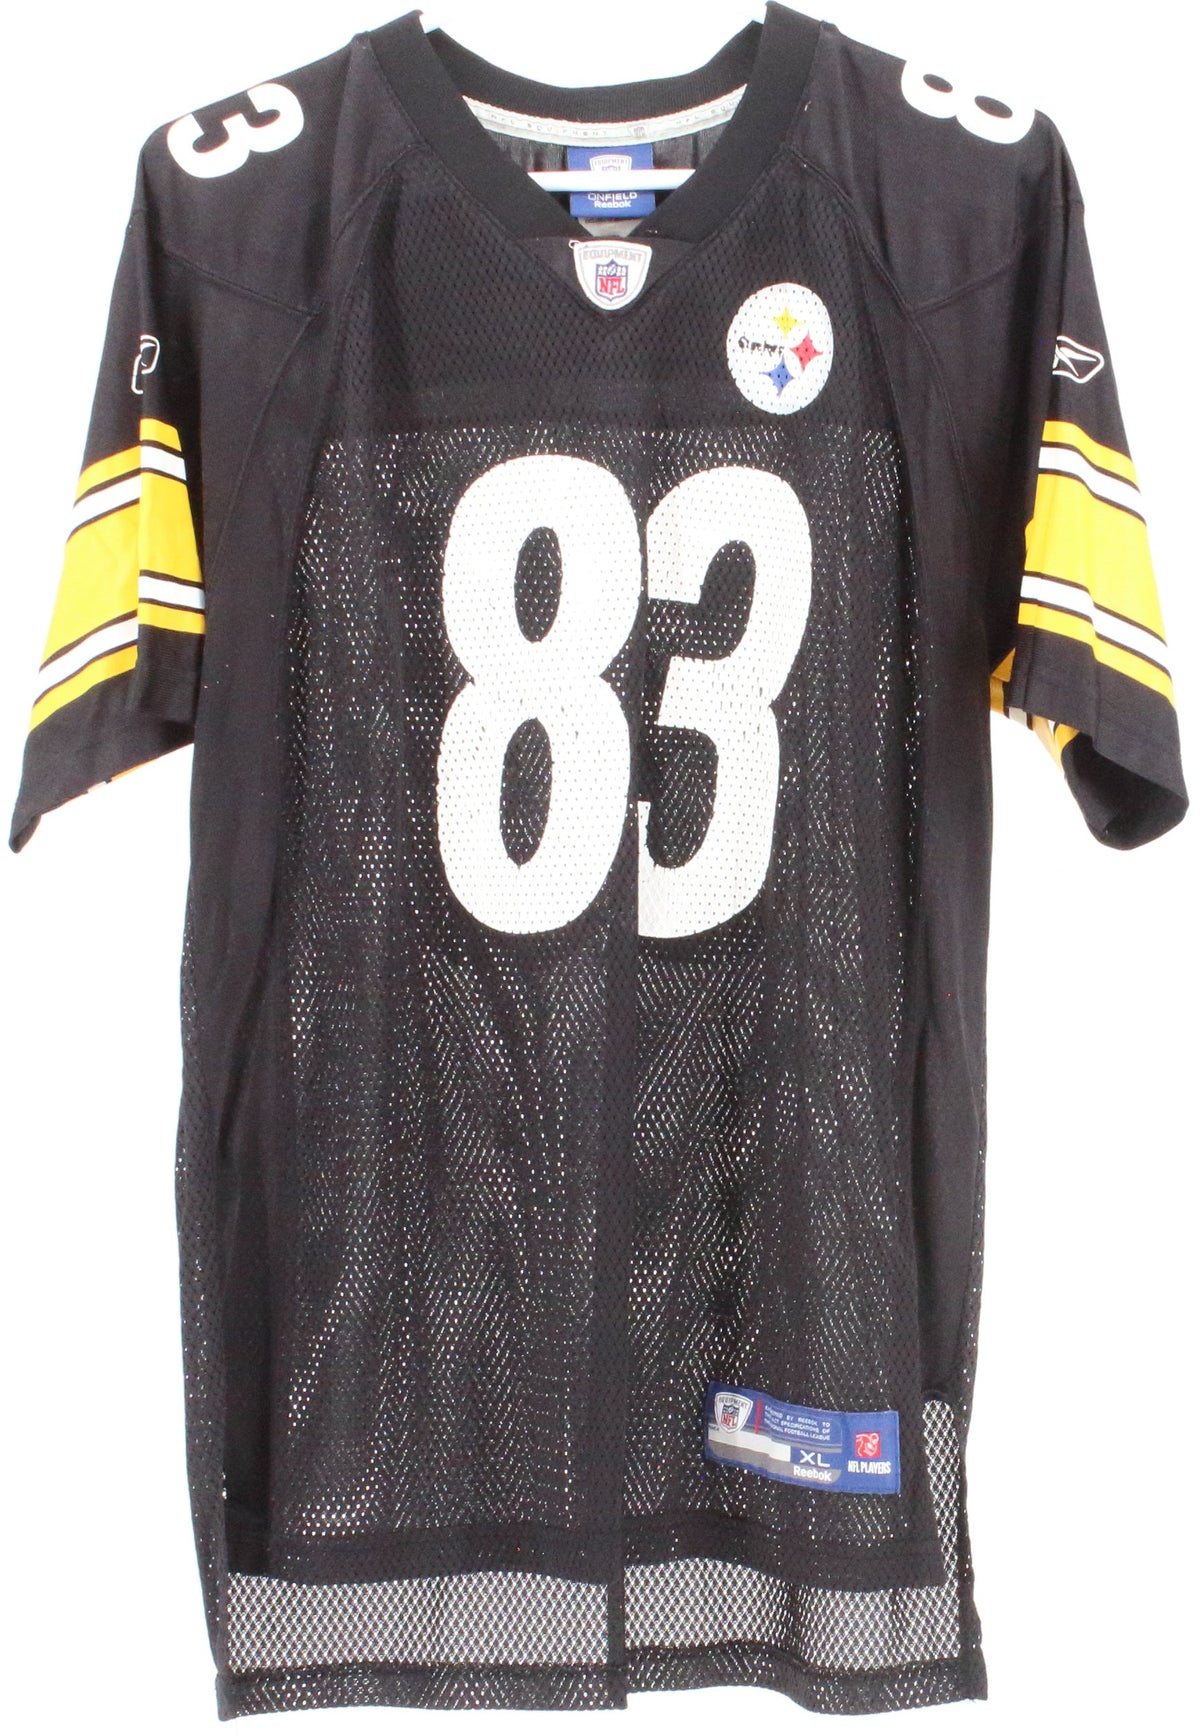 Reebok NFL Steelers 83 Miller Black and Yellow Jersey